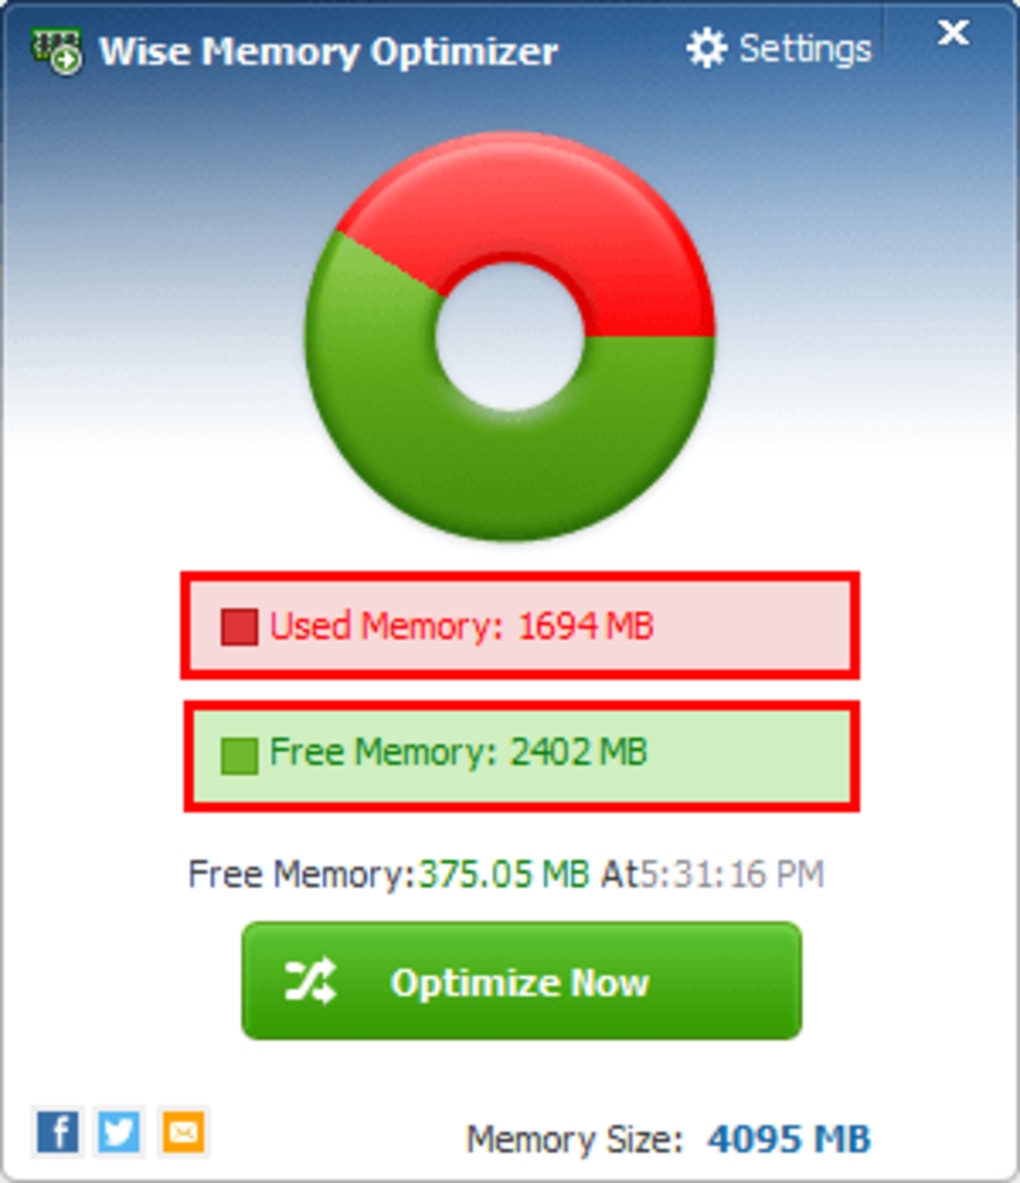 Wisecleaner com wise memory optimizer